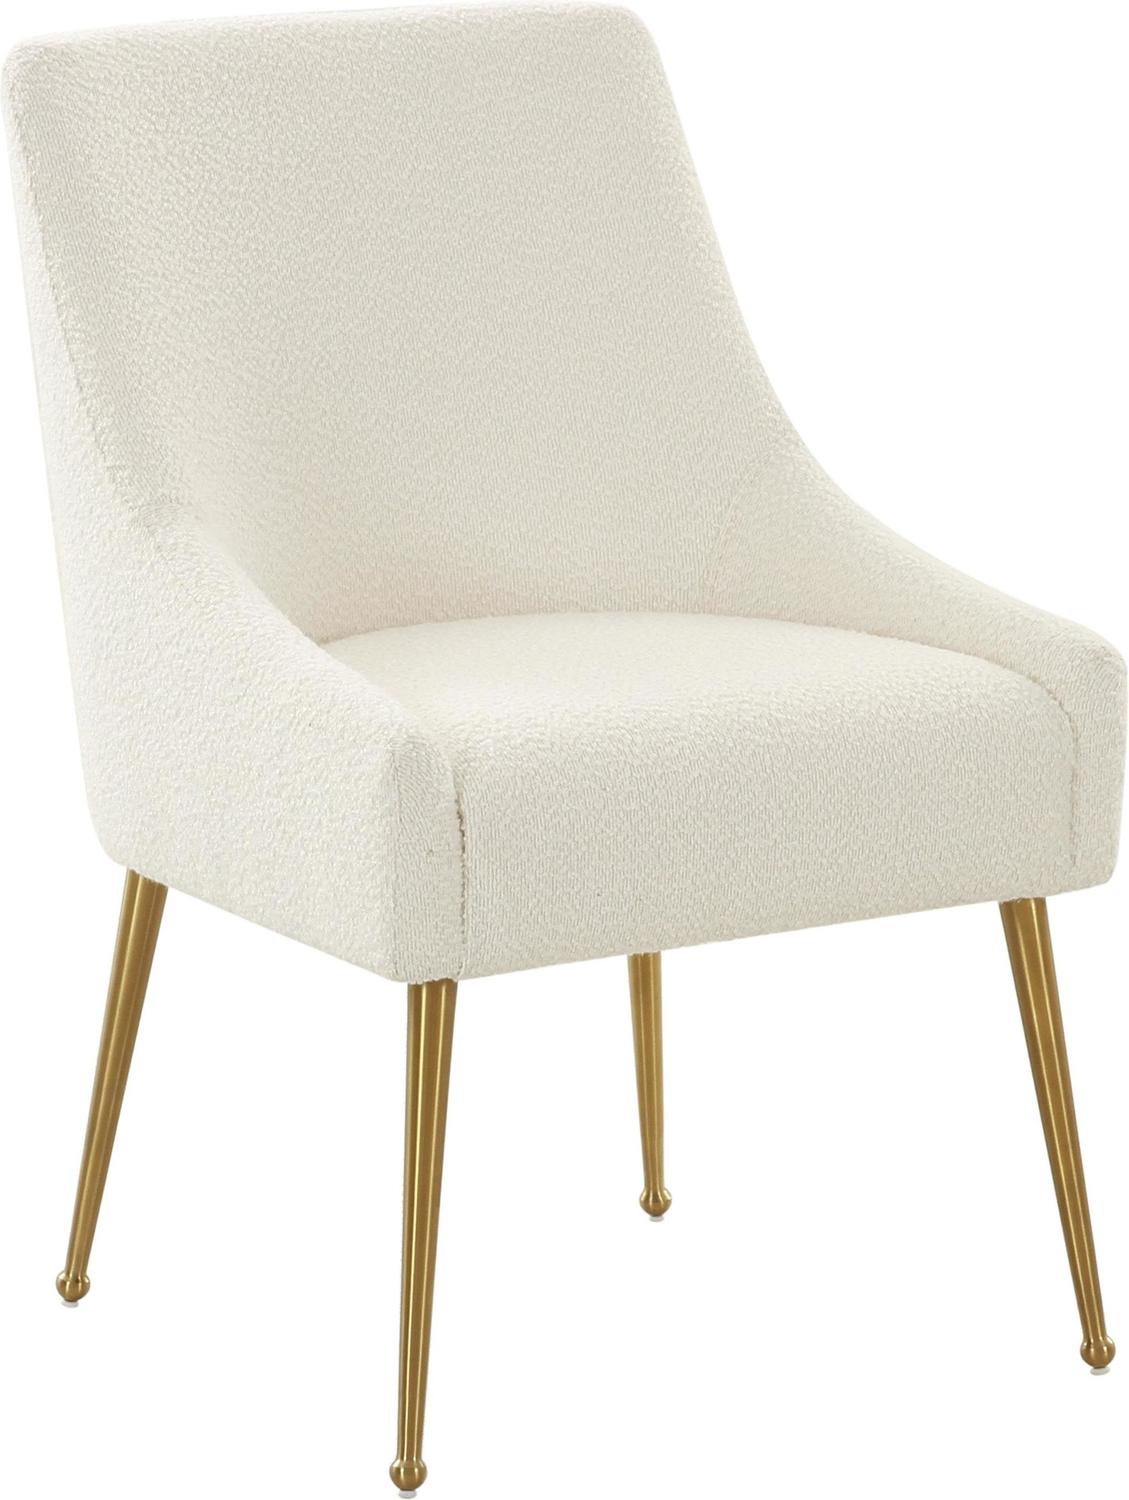 blue leather arm chairs Tov Furniture Dining Chairs Cream